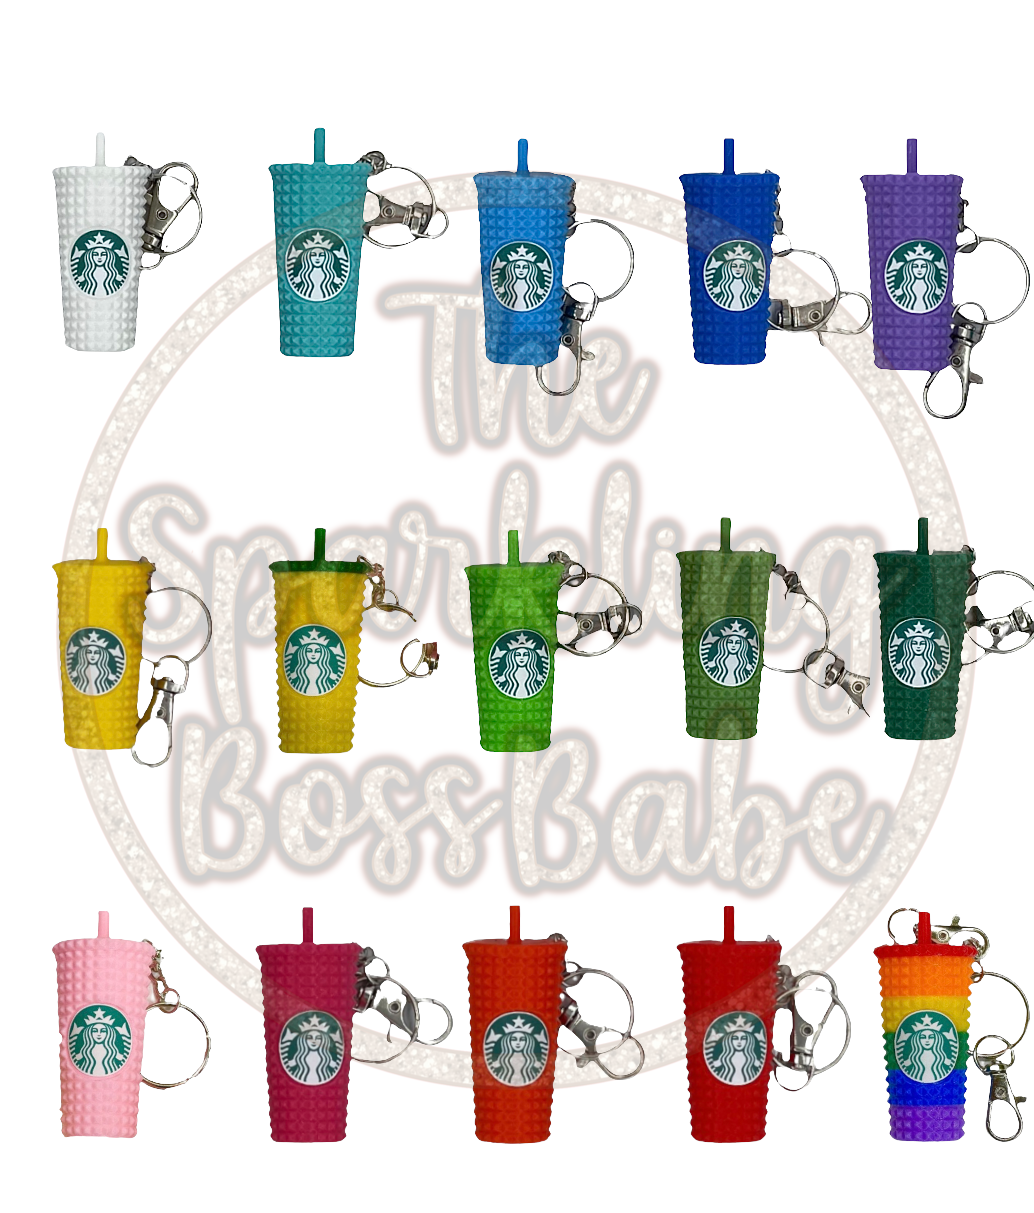 The Roost Iced Coffee Cup Shaker Snowglobe Keychain Bag Charm From Animal  Crossing With Personalization 